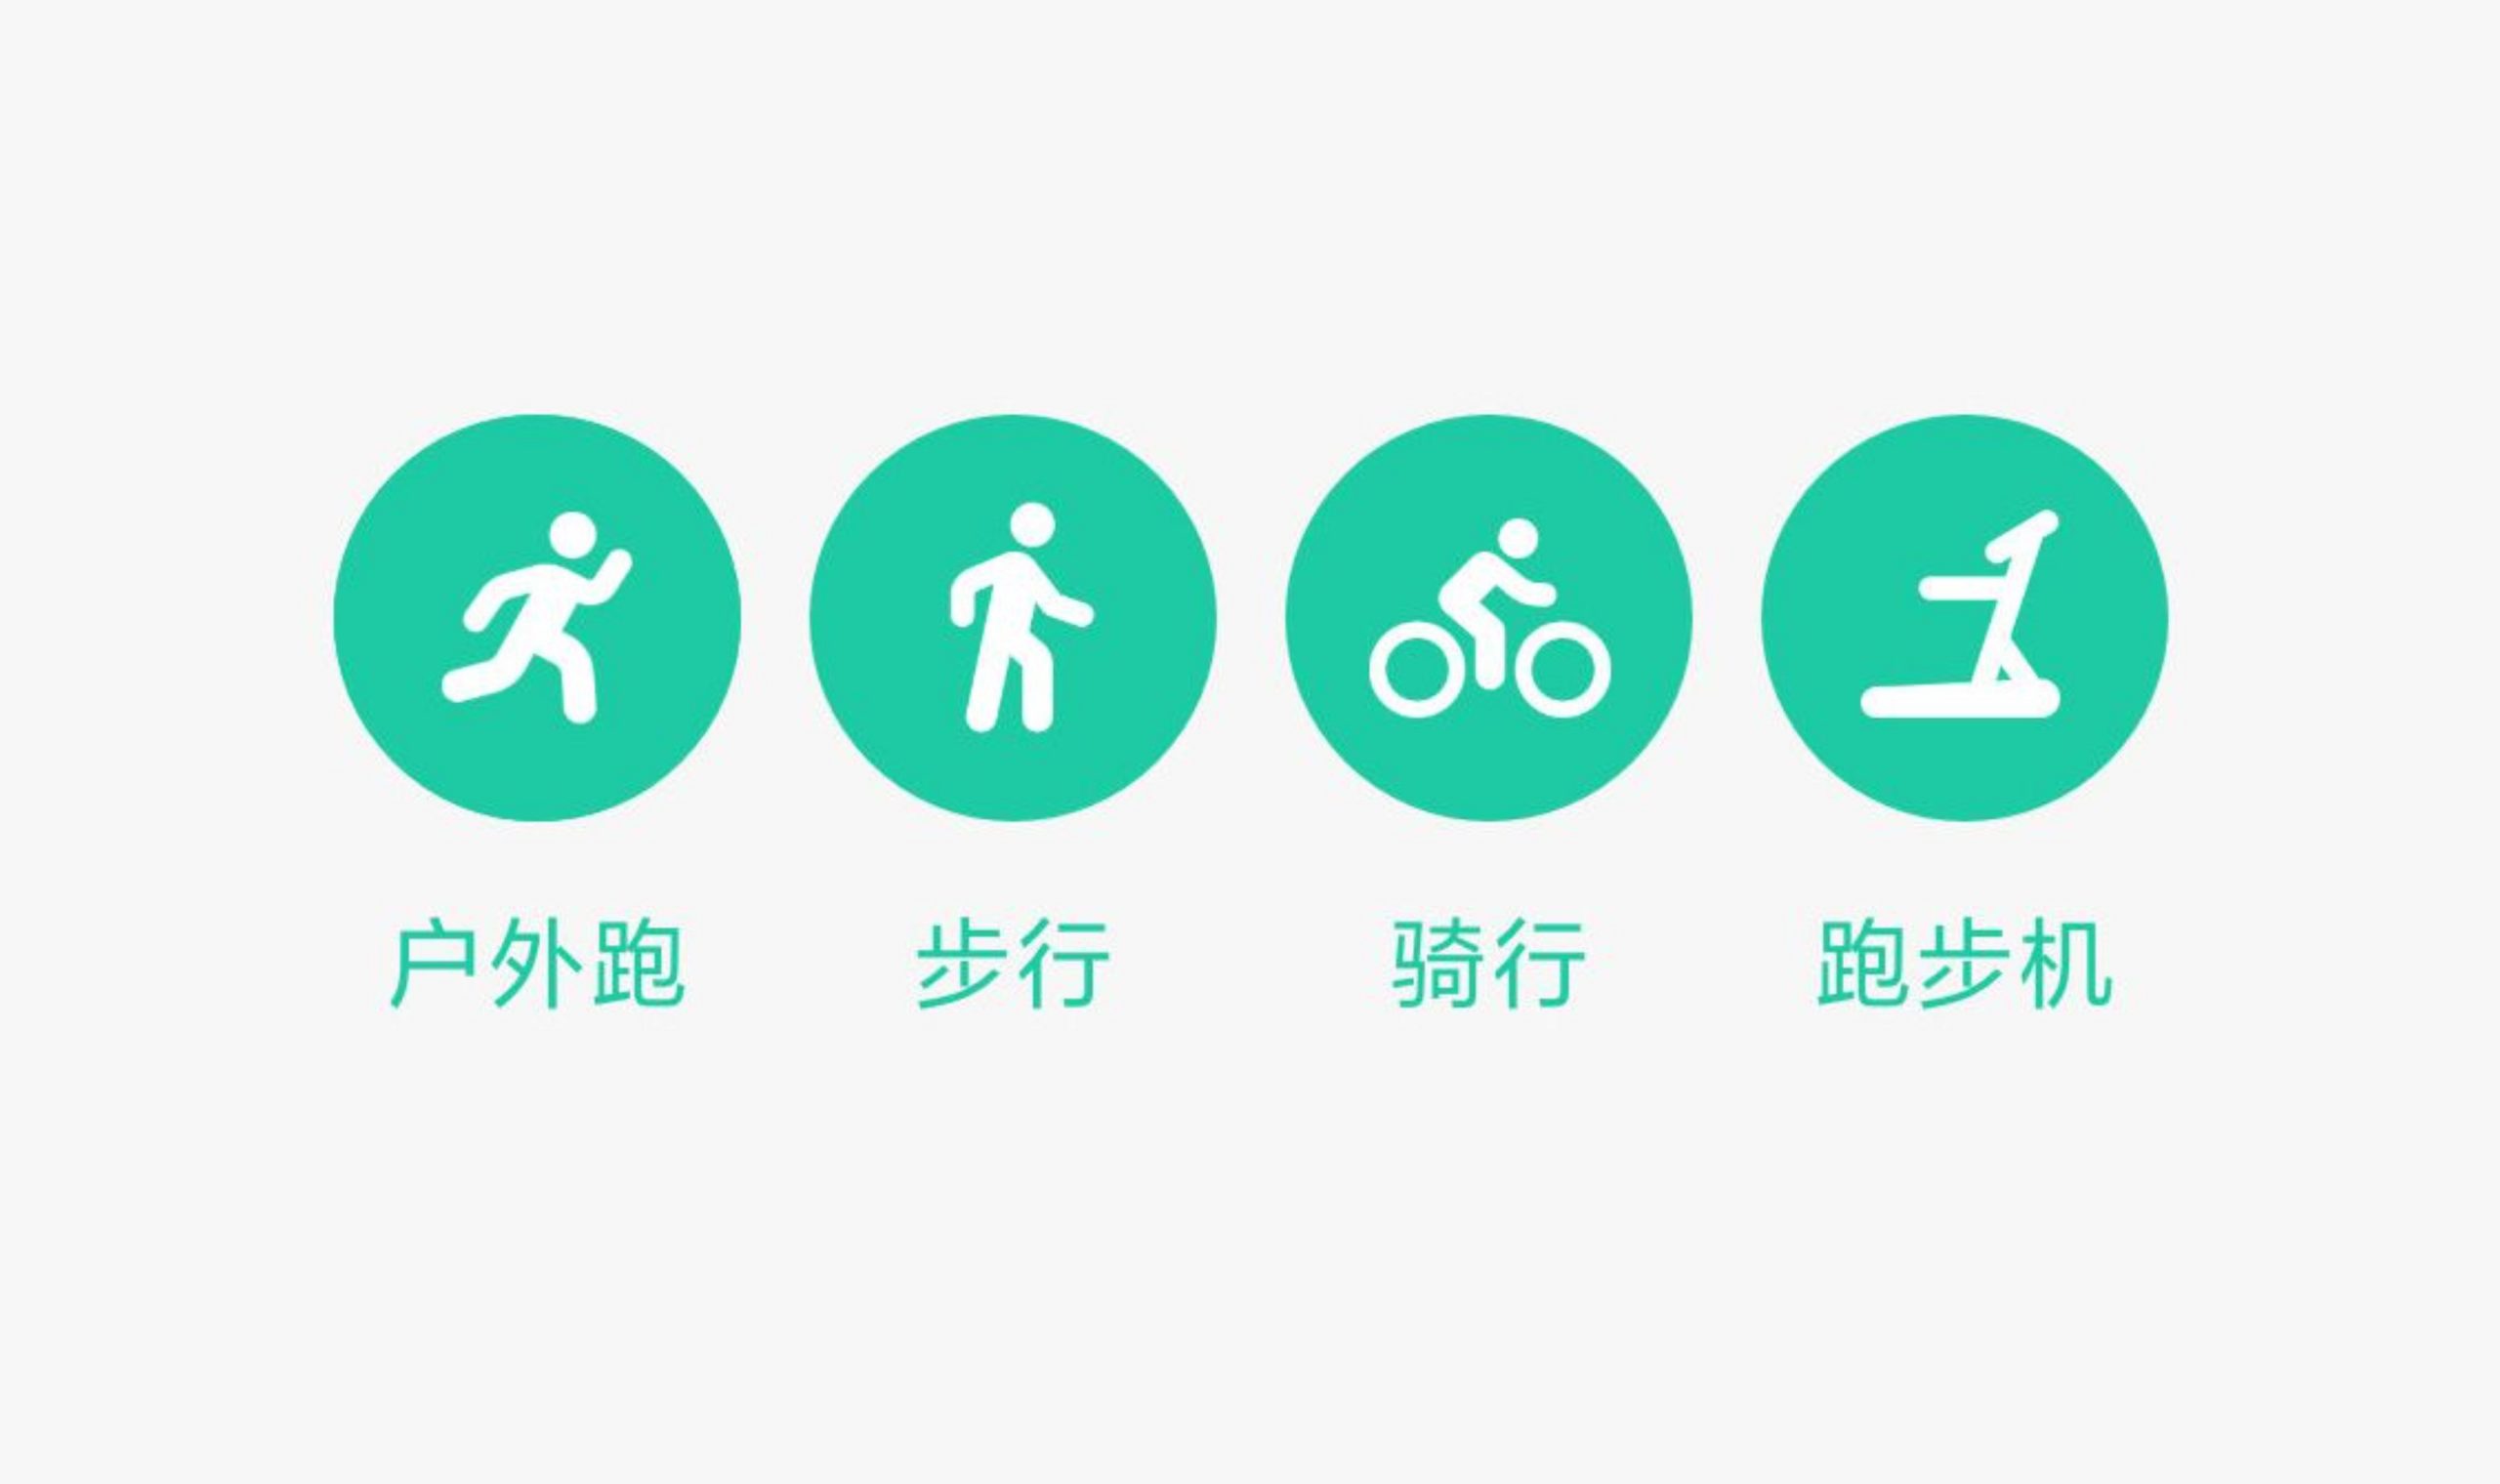 MIUI Health app can now track four sports activities without fitness tracker or smartwatch